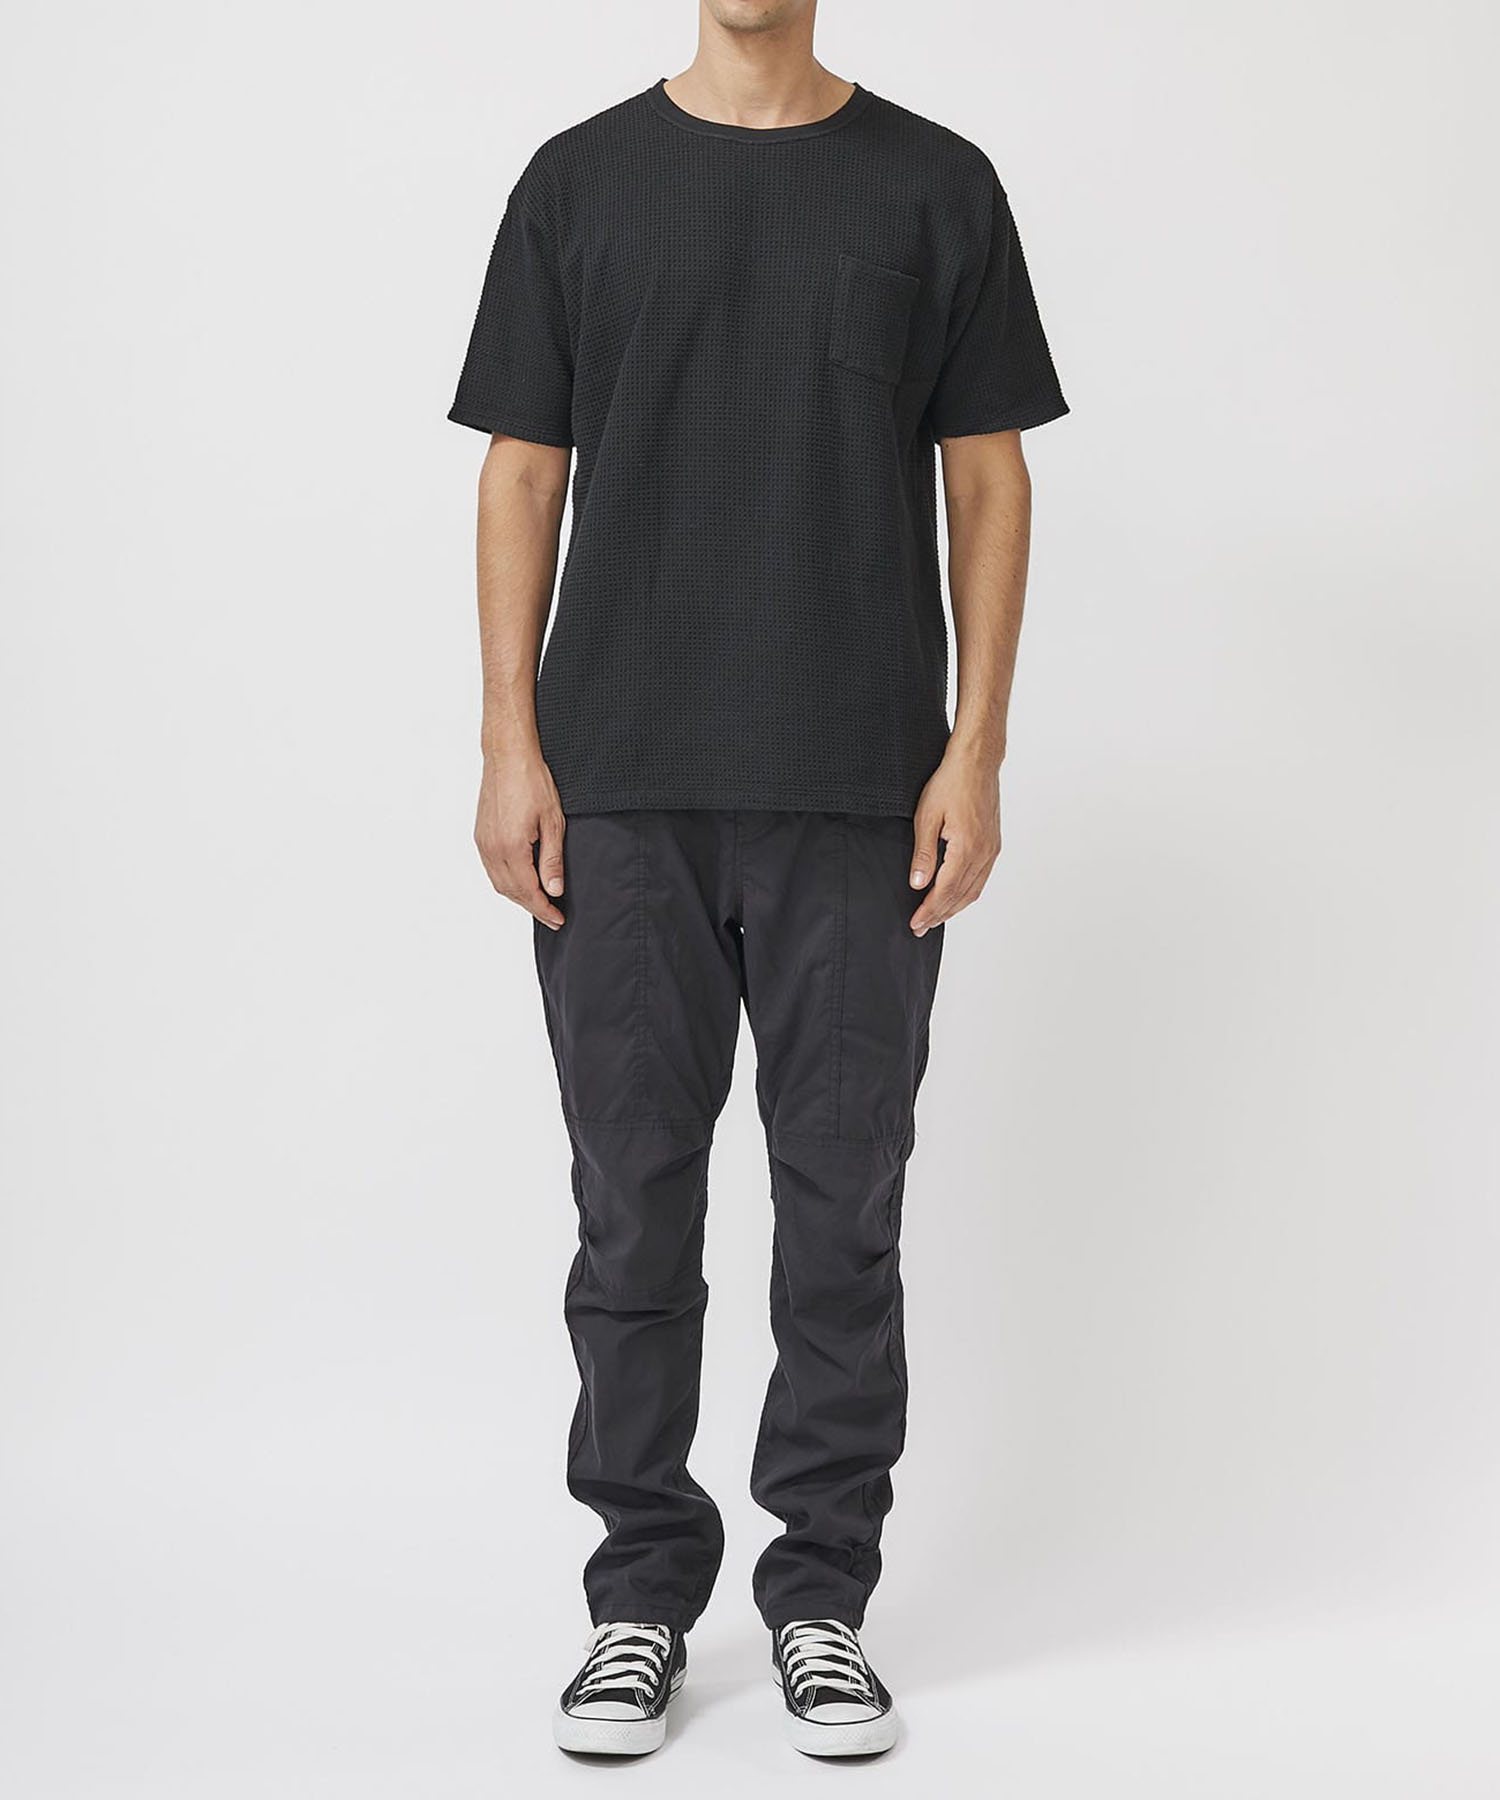 EDUCATOR 6P TROUSERS RELAXED FIT nonnative